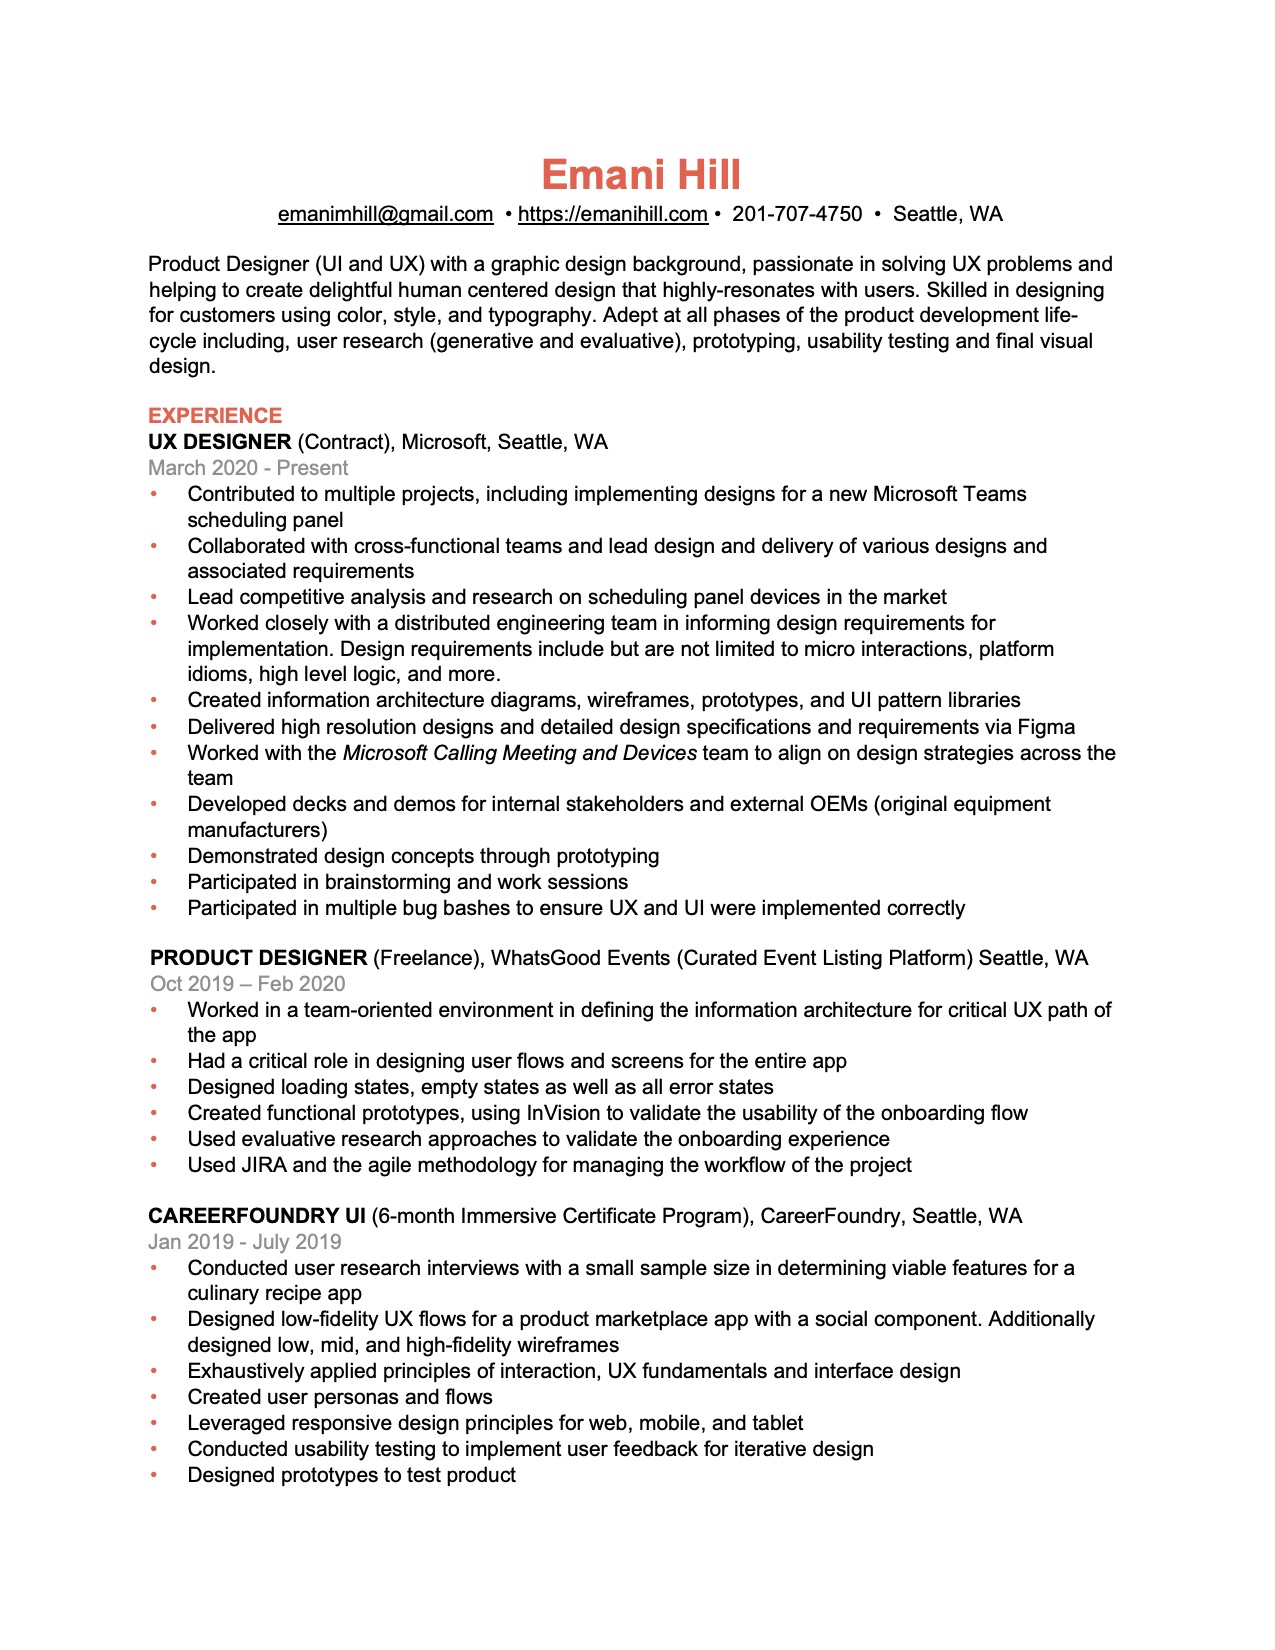 Resume page 1